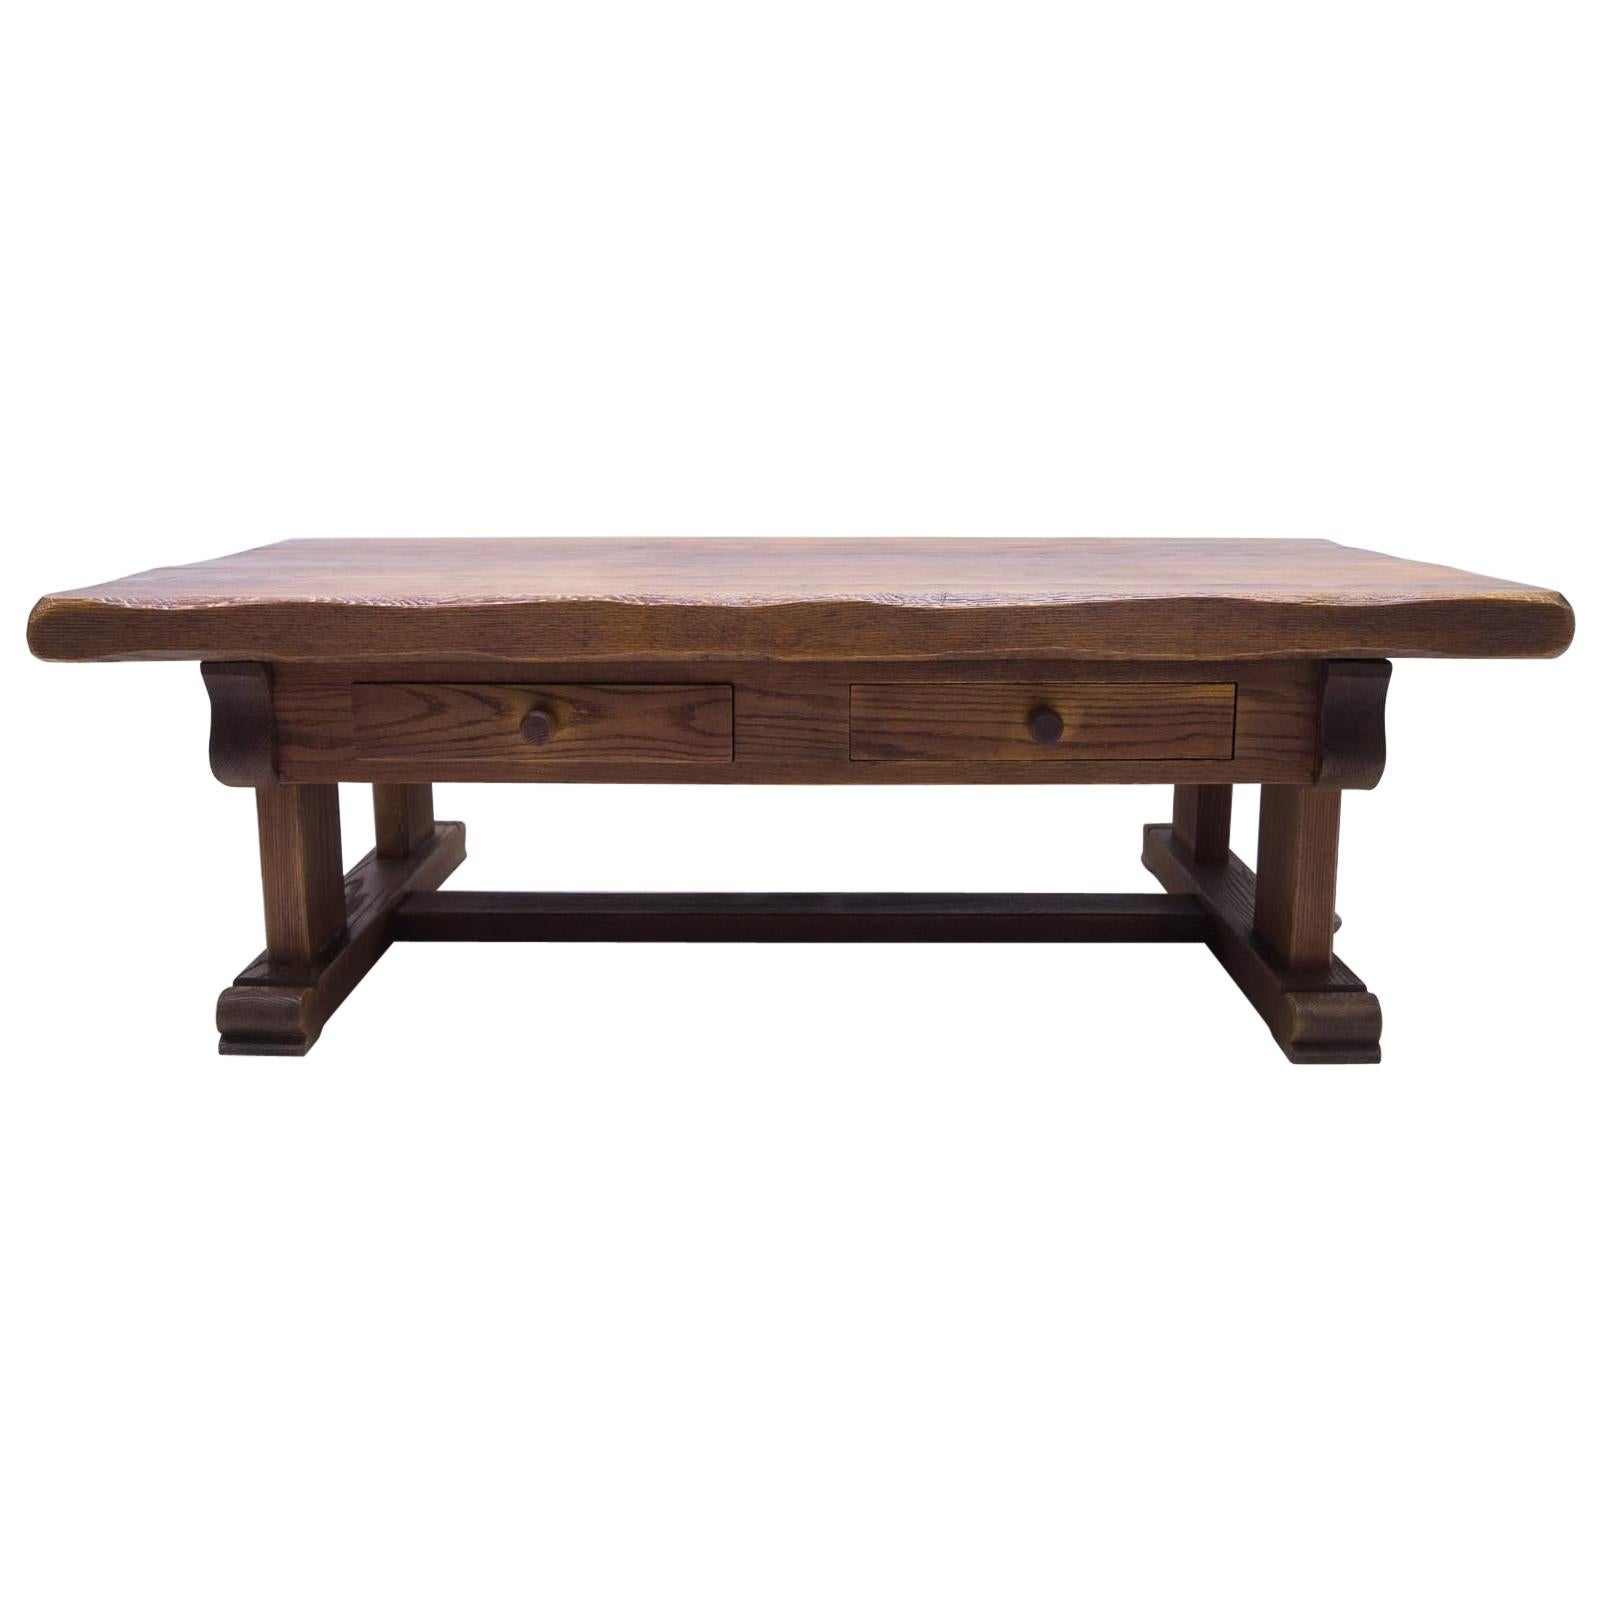 Large Heavy French Rustic Coffee Table Made of Solid Oak, 1960s